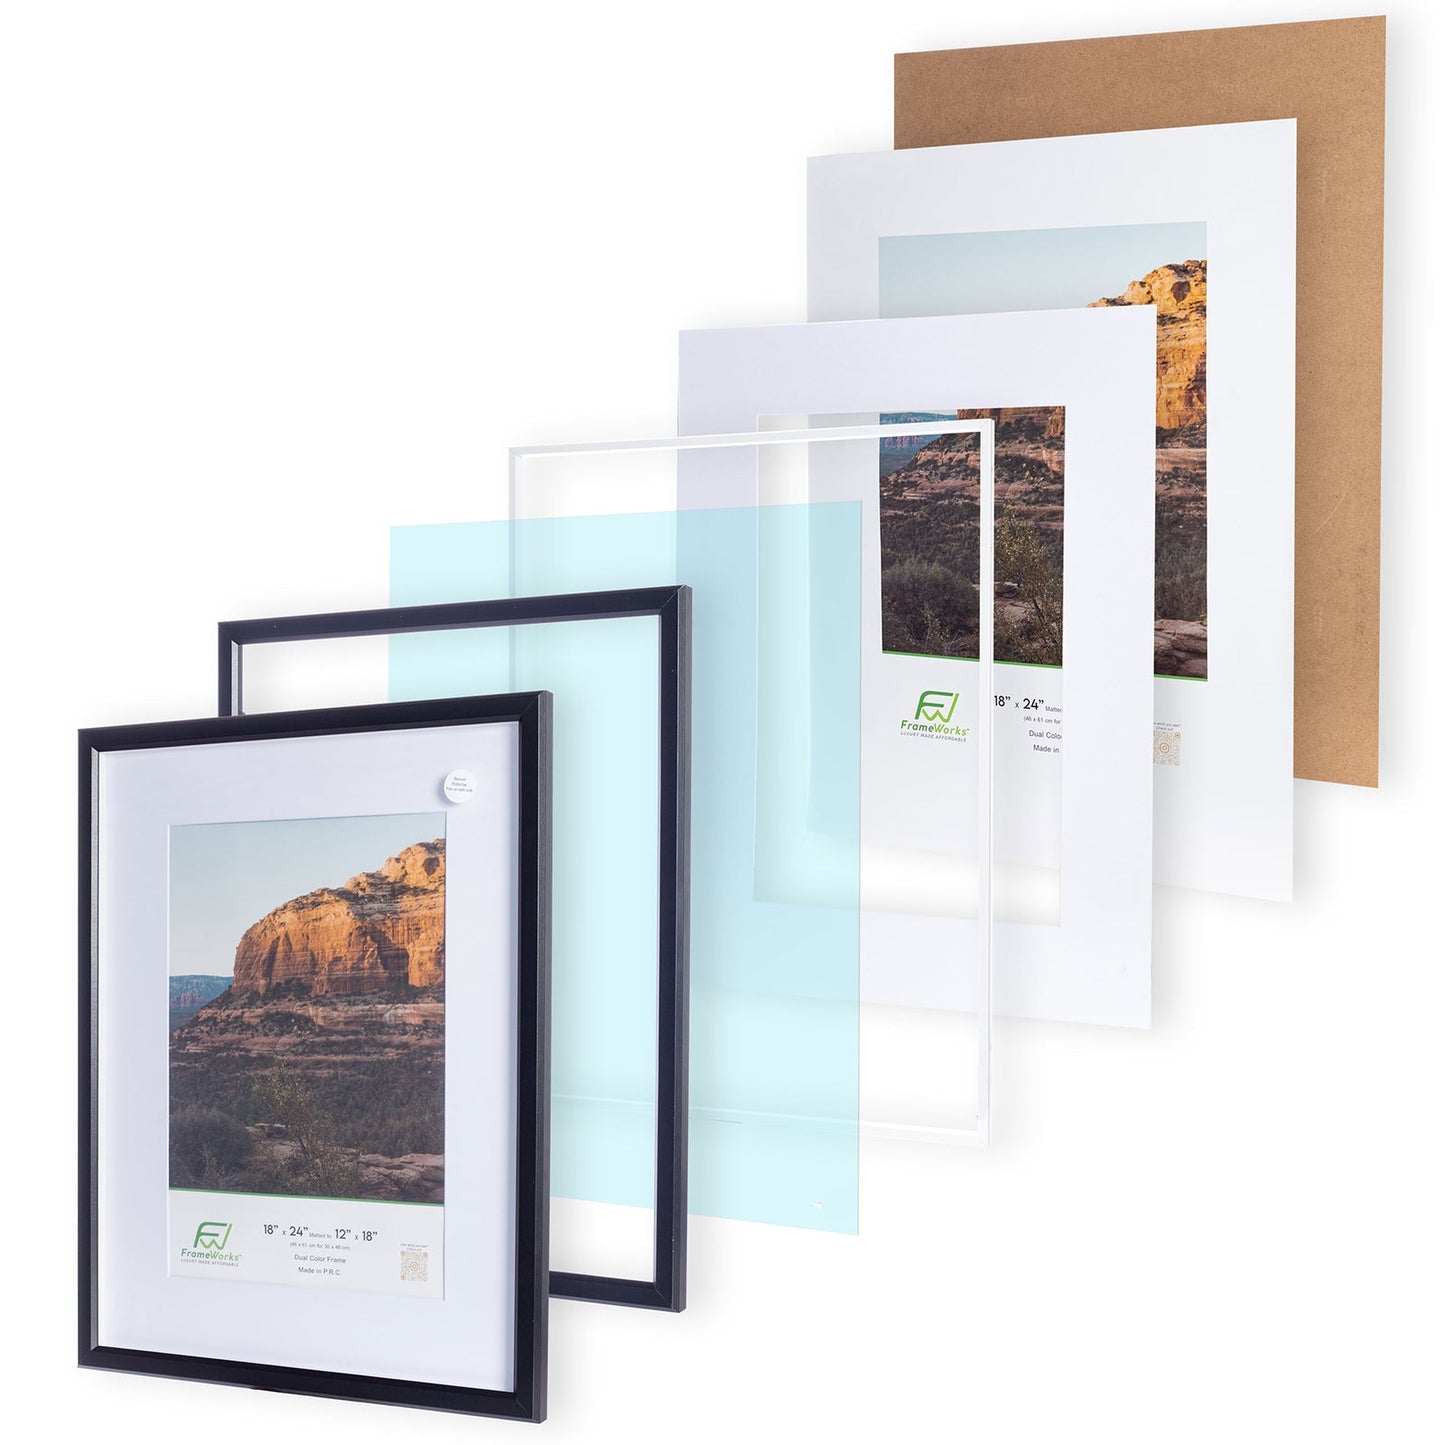 18" x 24" Black MDF Wood Multi-Pack Gunnabo Picture Frames, 12" x 18" Matted